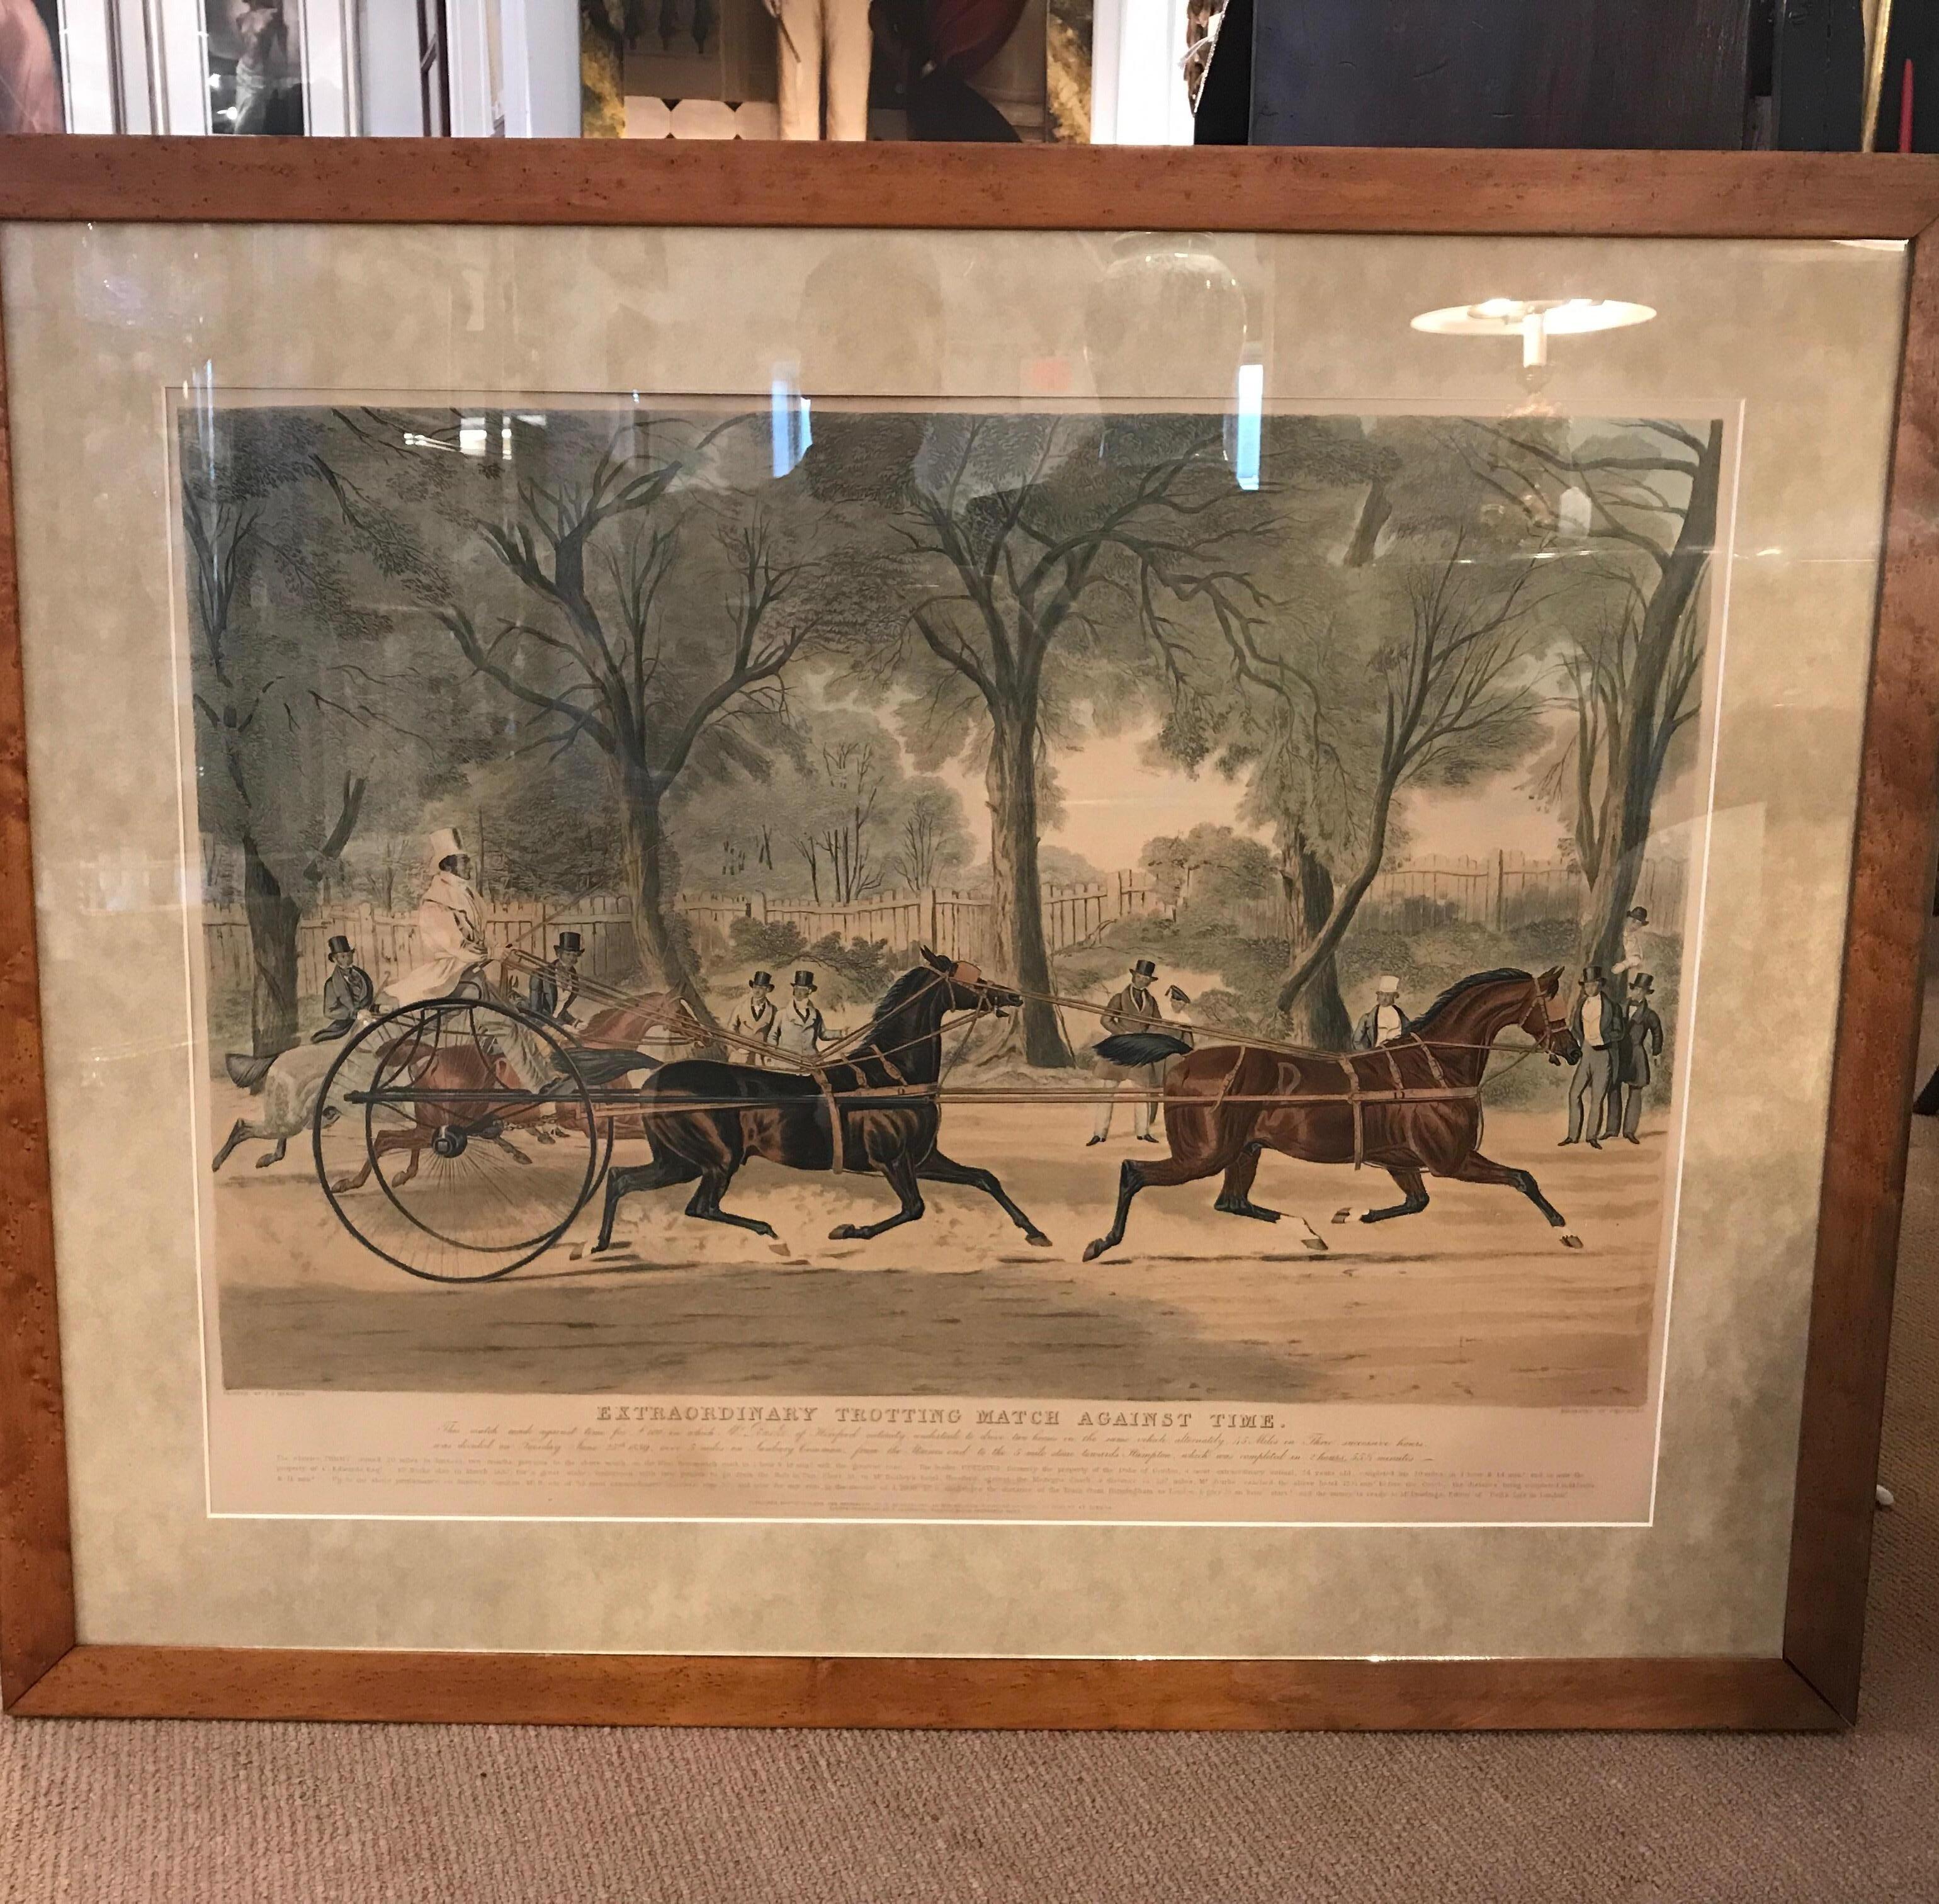 A hand colored engraving of a sulky horse race, England, 1839. Great original print with some toning published by Ackerman, after a painting by J.F. Herring, engraved by Chris Hunt. Framed in a later custom bird’s-eye maple frame under glass.